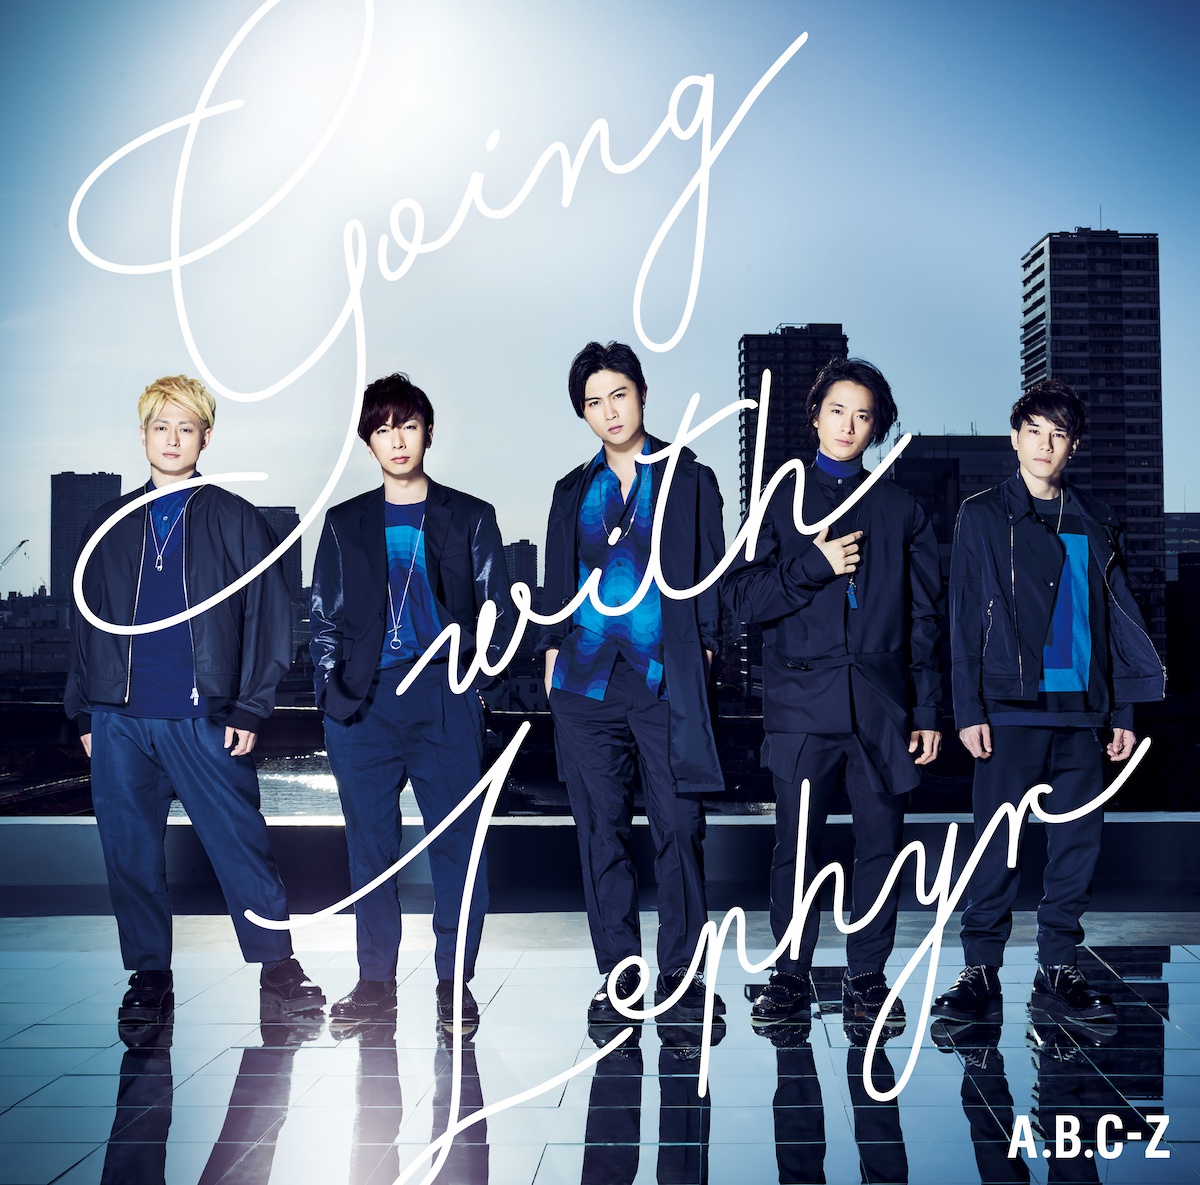 『A.B.C-Z - FORTUNE』収録の『Going with Zephyr』ジャケット